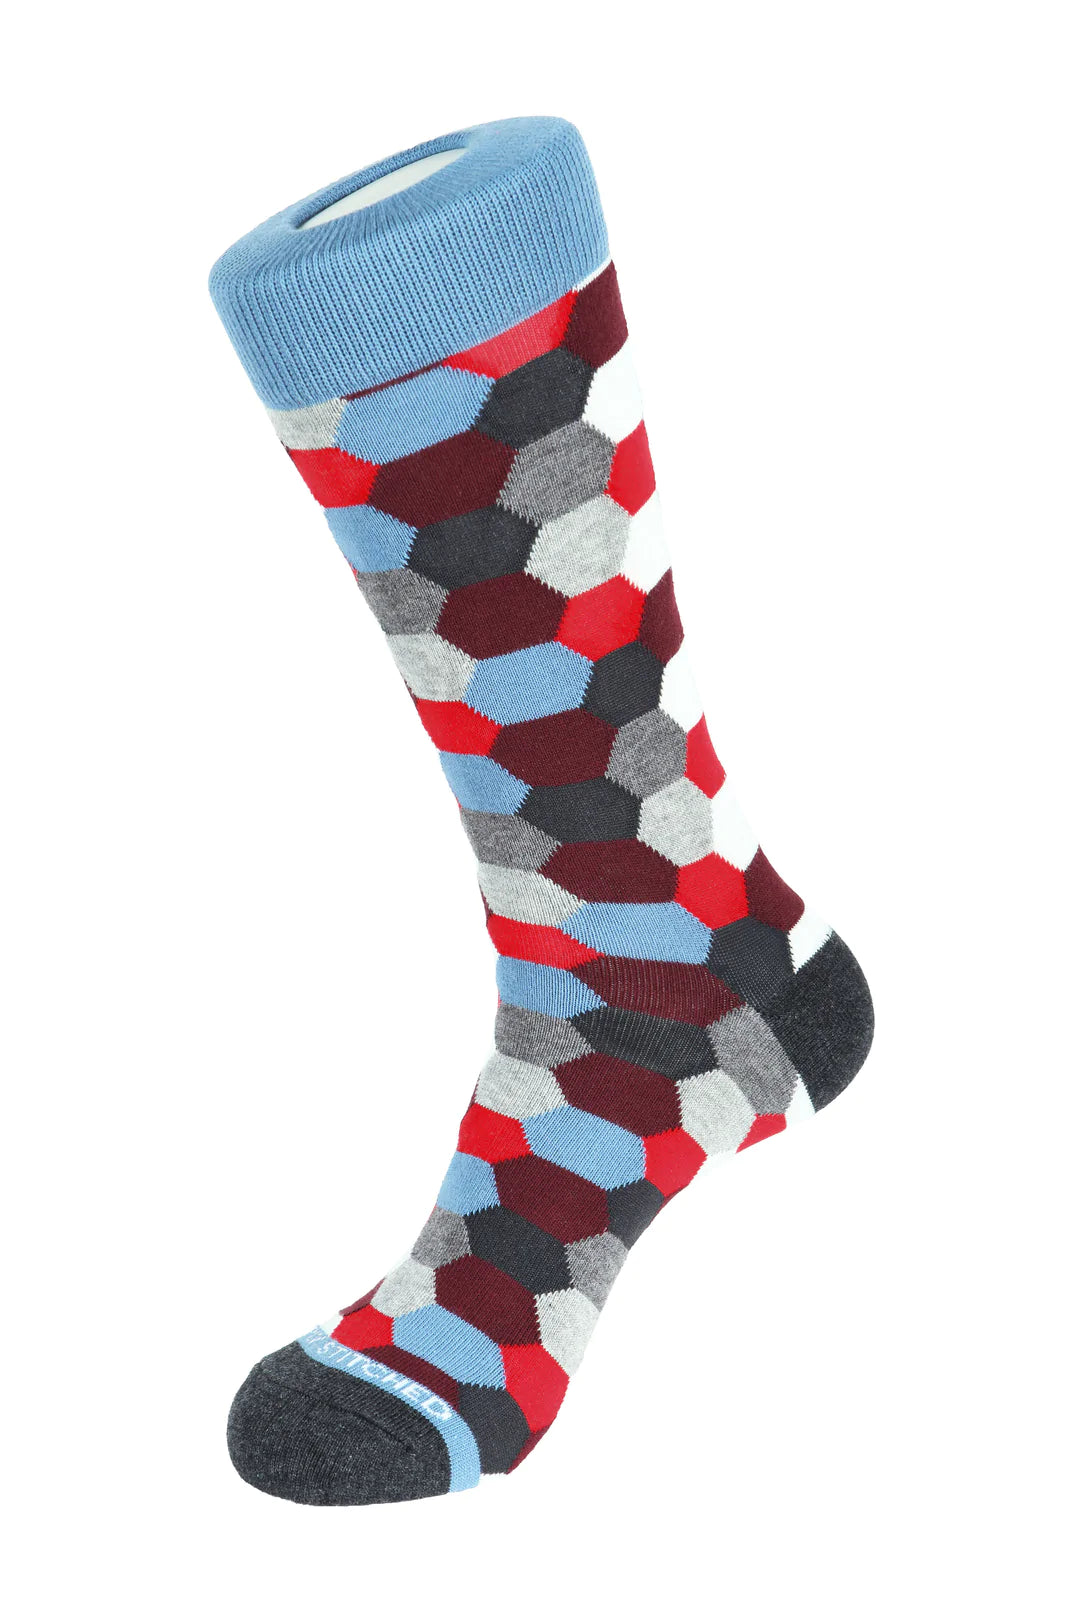 Unsimply Stitched socks with grey, red, and blue hexagon shapes, making it a great pairing with DFR89 blue denim jeans and a fun Sugar sport shirt.